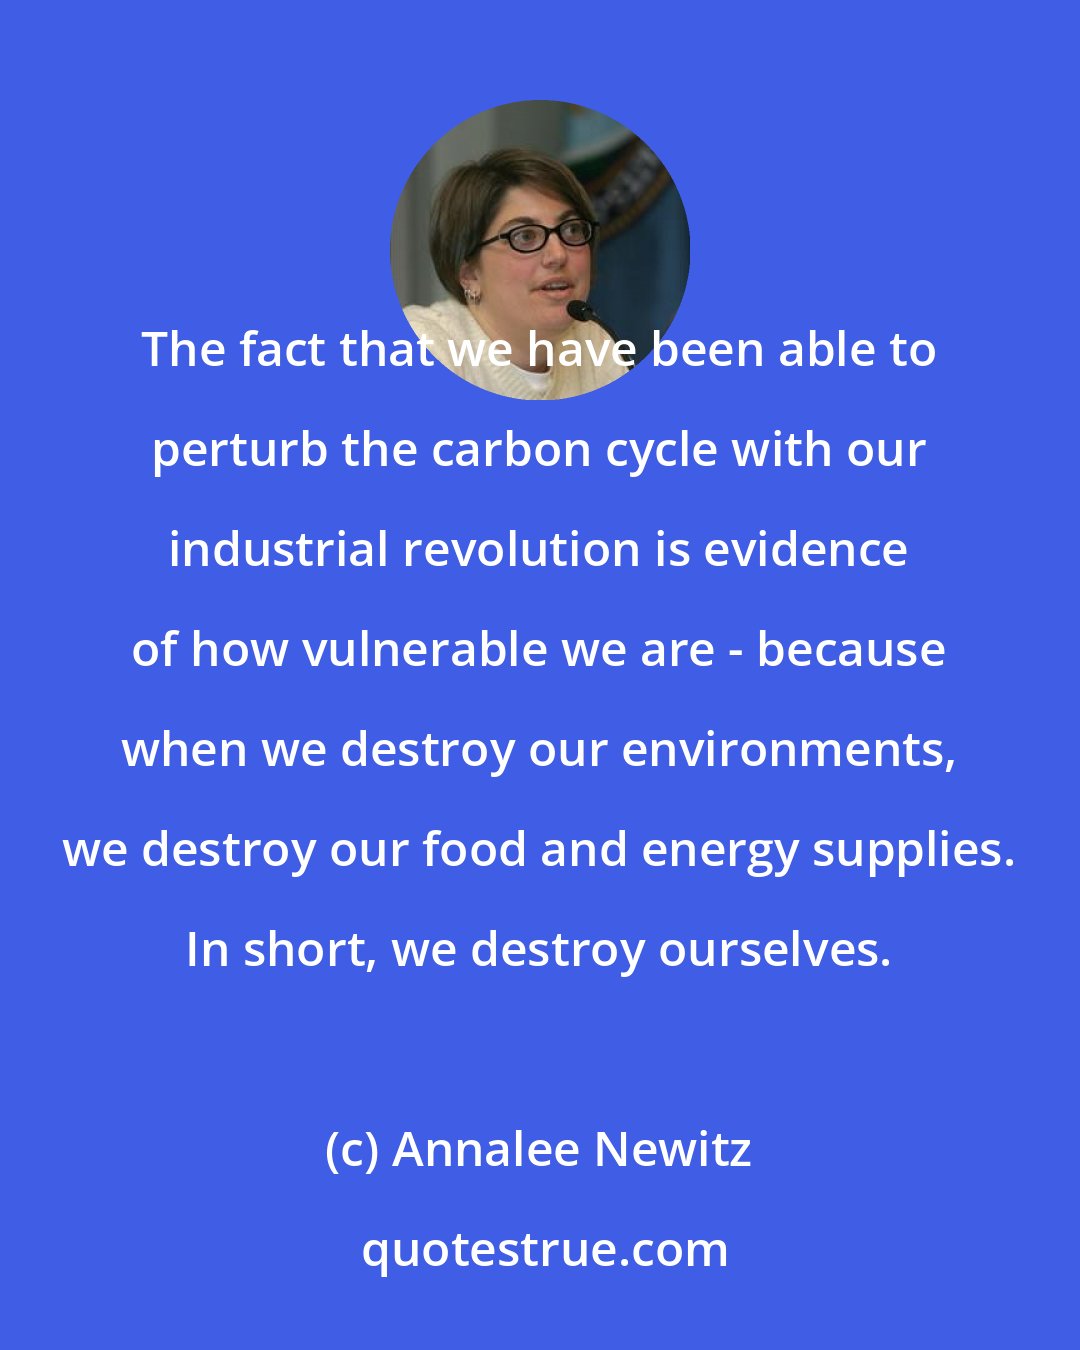 Annalee Newitz: The fact that we have been able to perturb the carbon cycle with our industrial revolution is evidence of how vulnerable we are - because when we destroy our environments, we destroy our food and energy supplies. In short, we destroy ourselves.